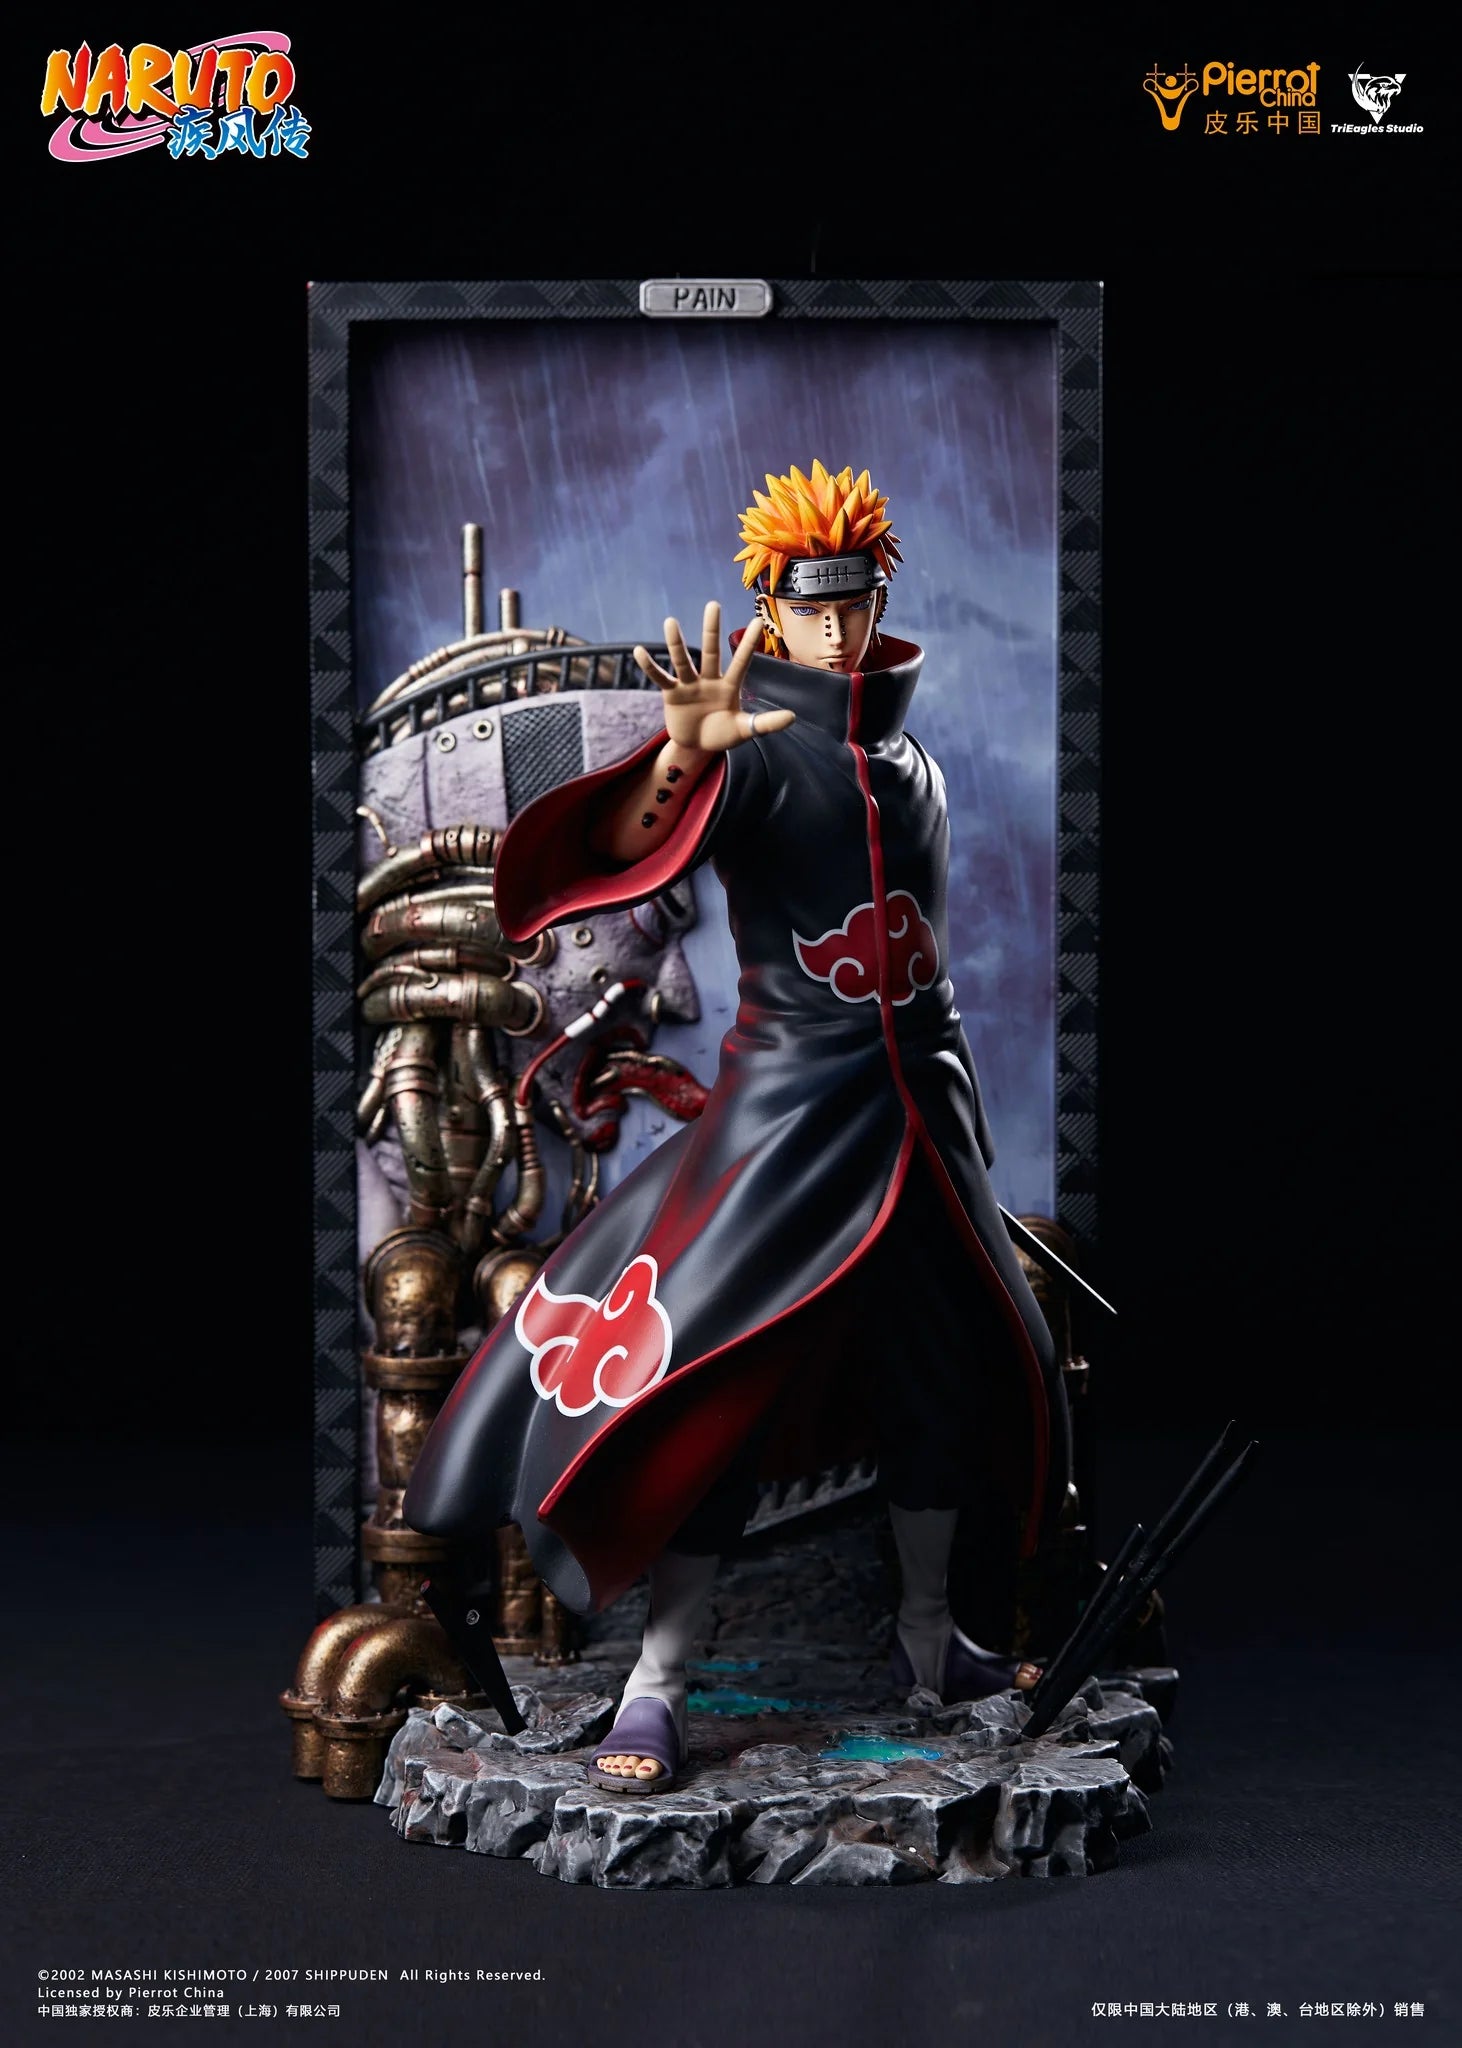 PAIN 1/6 SCALE STATUE